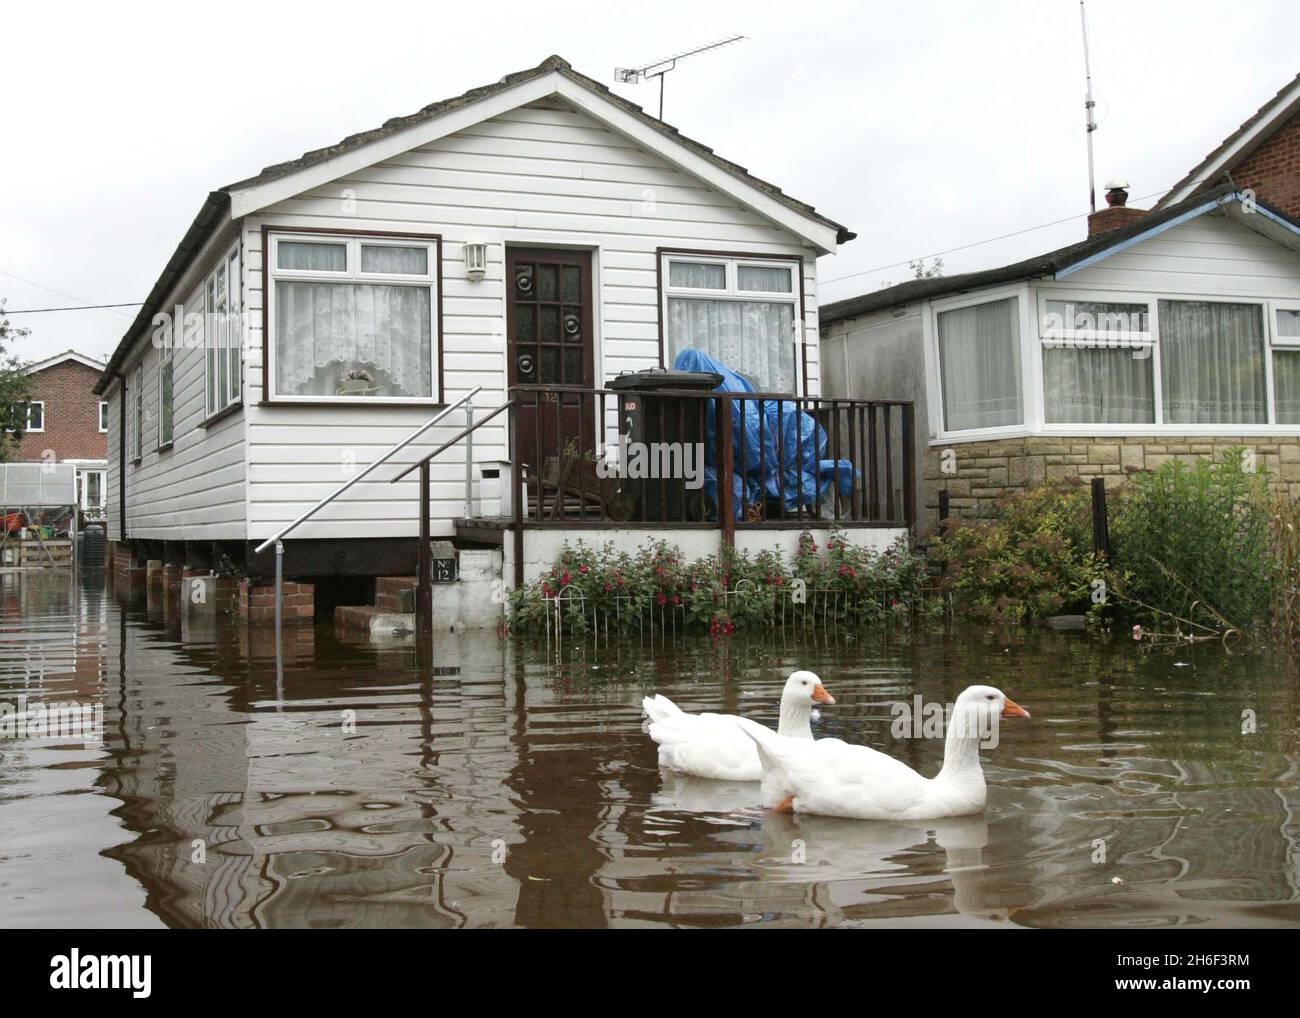 Geese take advantage of the floods at Purley On The Thames in England. Stock Photo